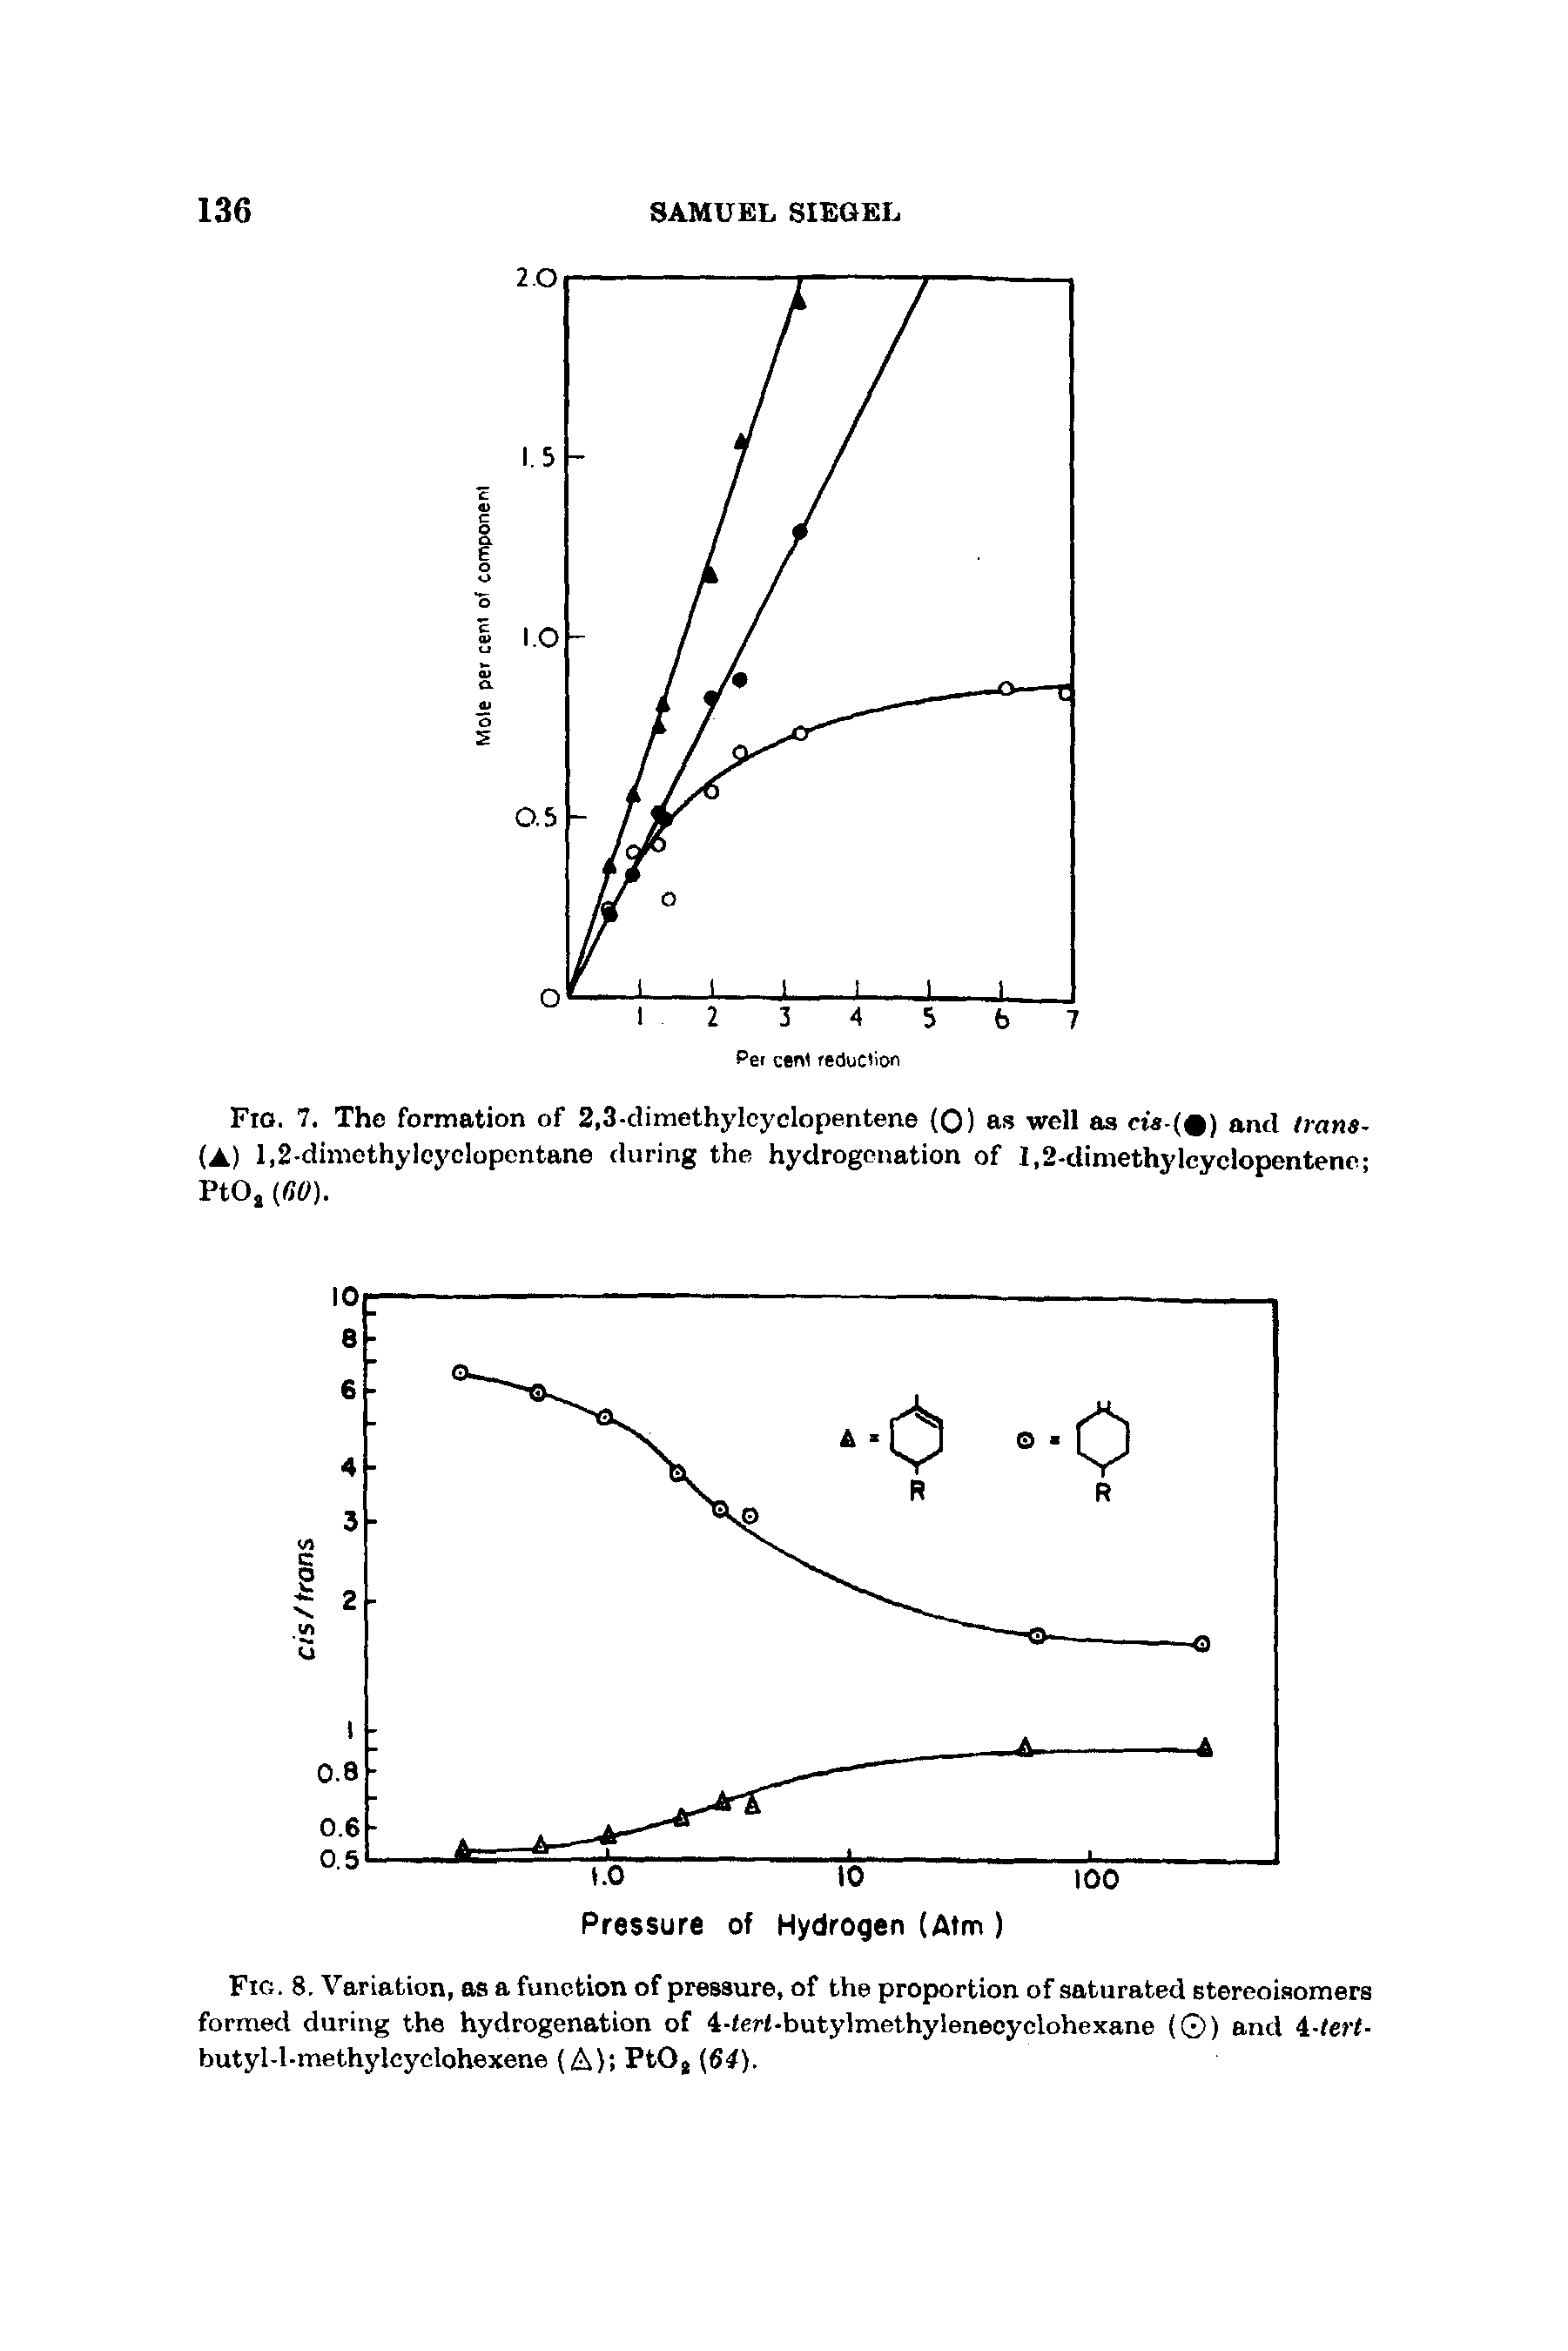 Fig. 8. Variation, as a function of pressure, of the proportion of saturated stereoisomers formed during the hydrogenation of 4-(eH-butylmethyleneoyclohexane ( ) and i-tert-butyl- -methylcyelohexene (A) PtOj [64).